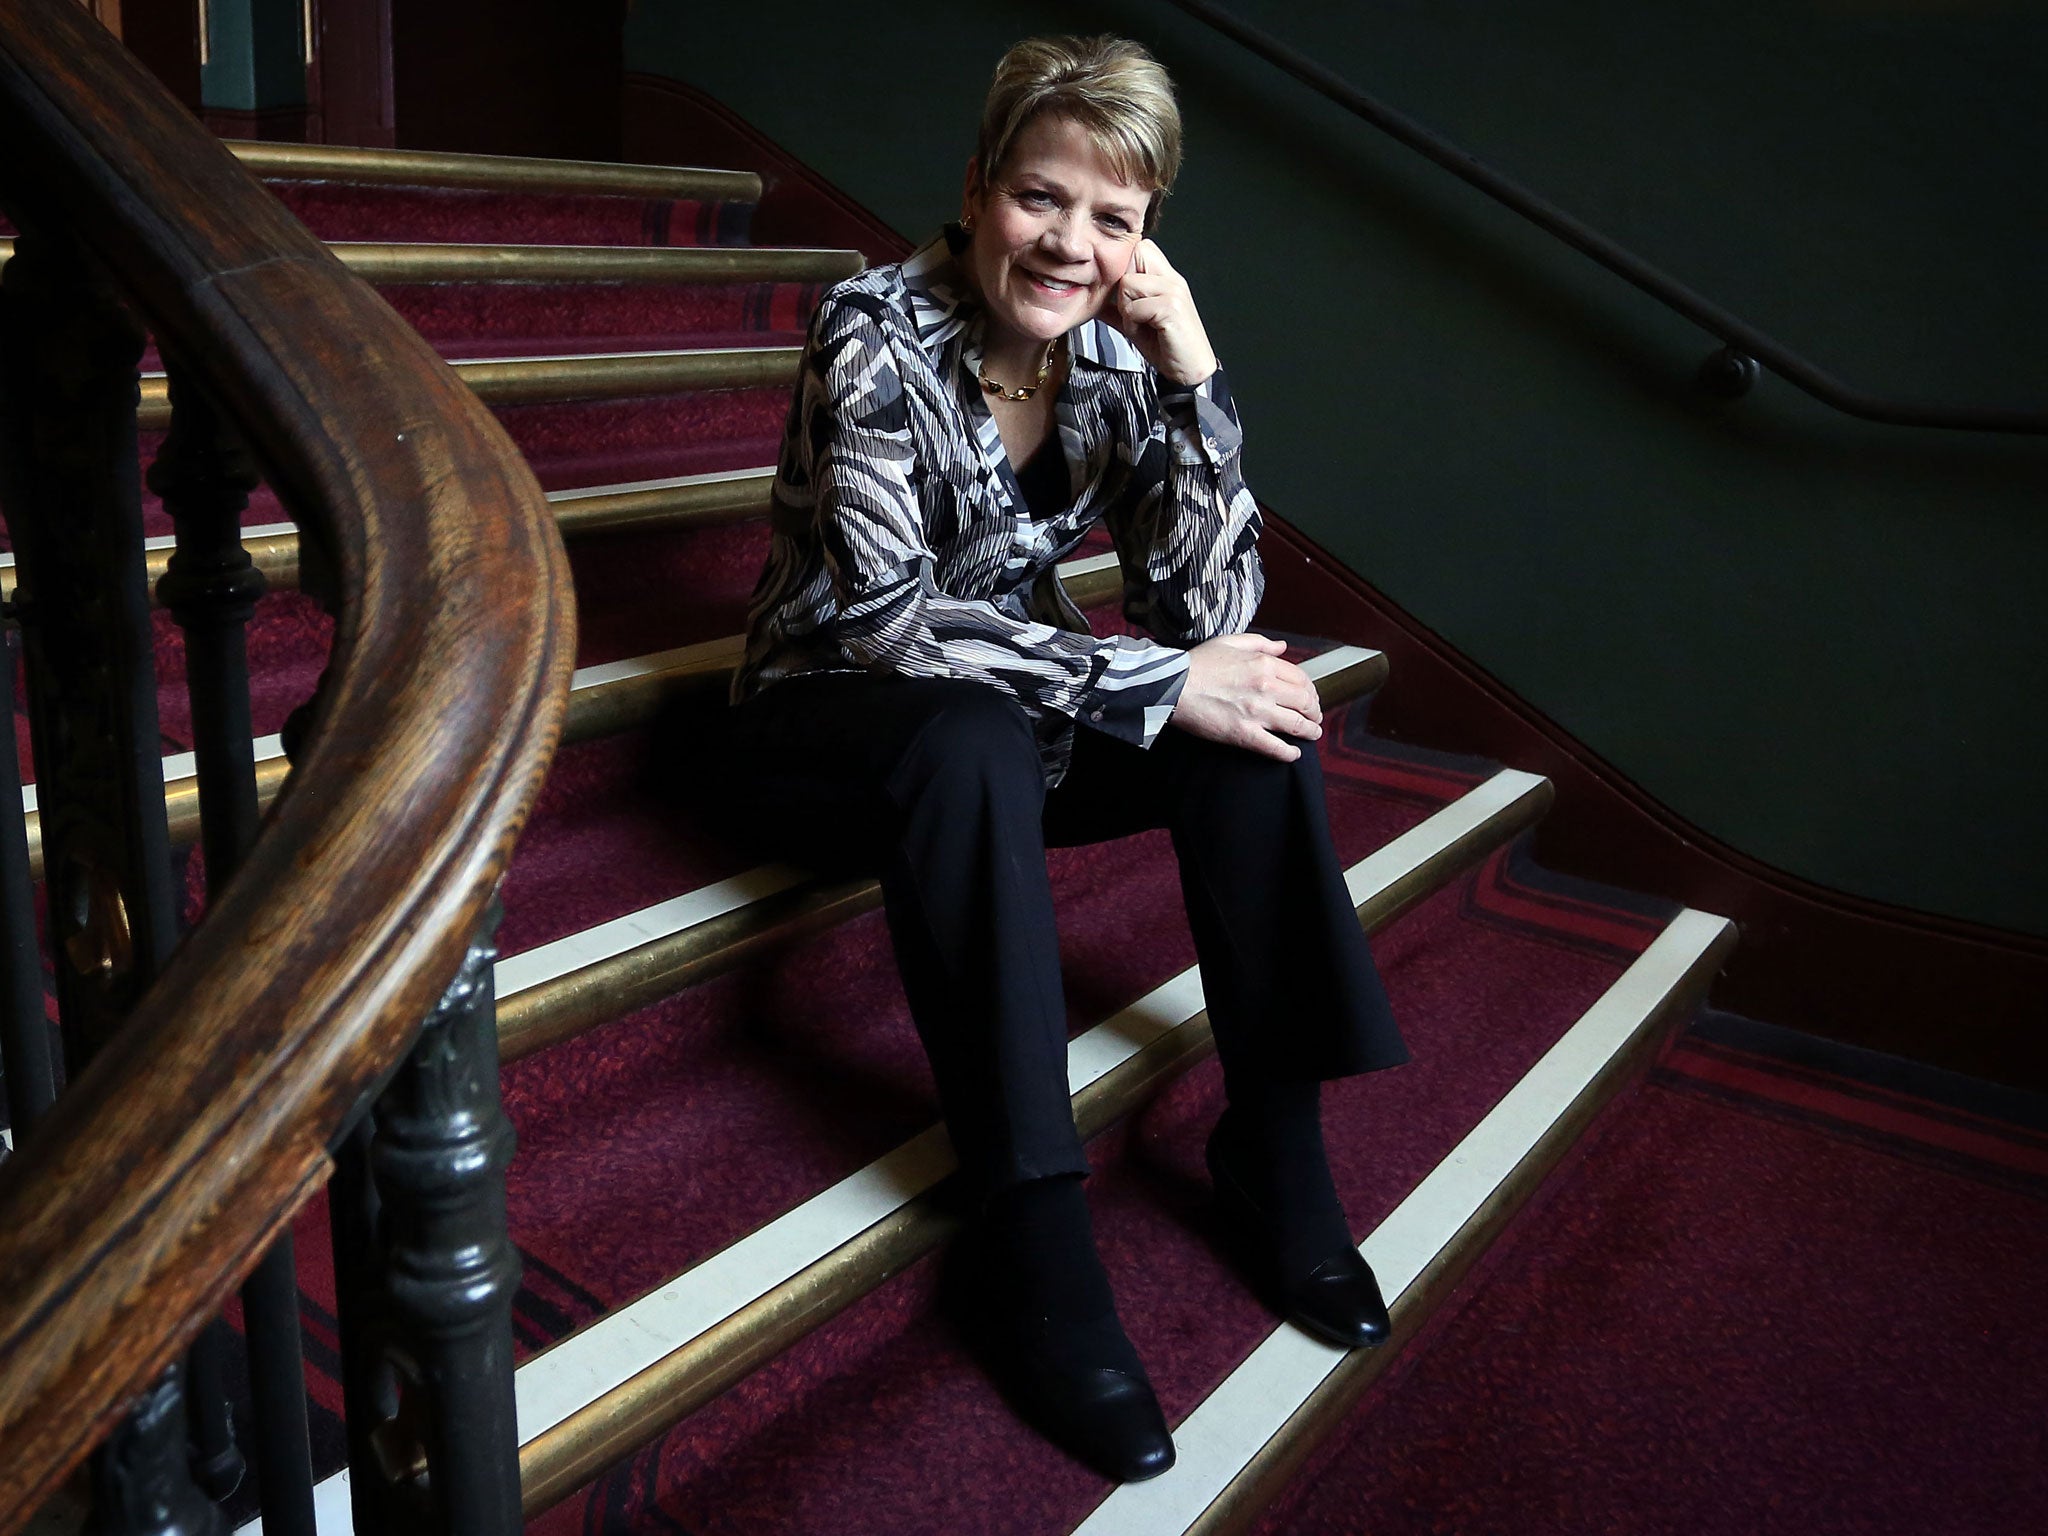 Marin Alsop will be the first female conductor on the Royal Albert Hall podium